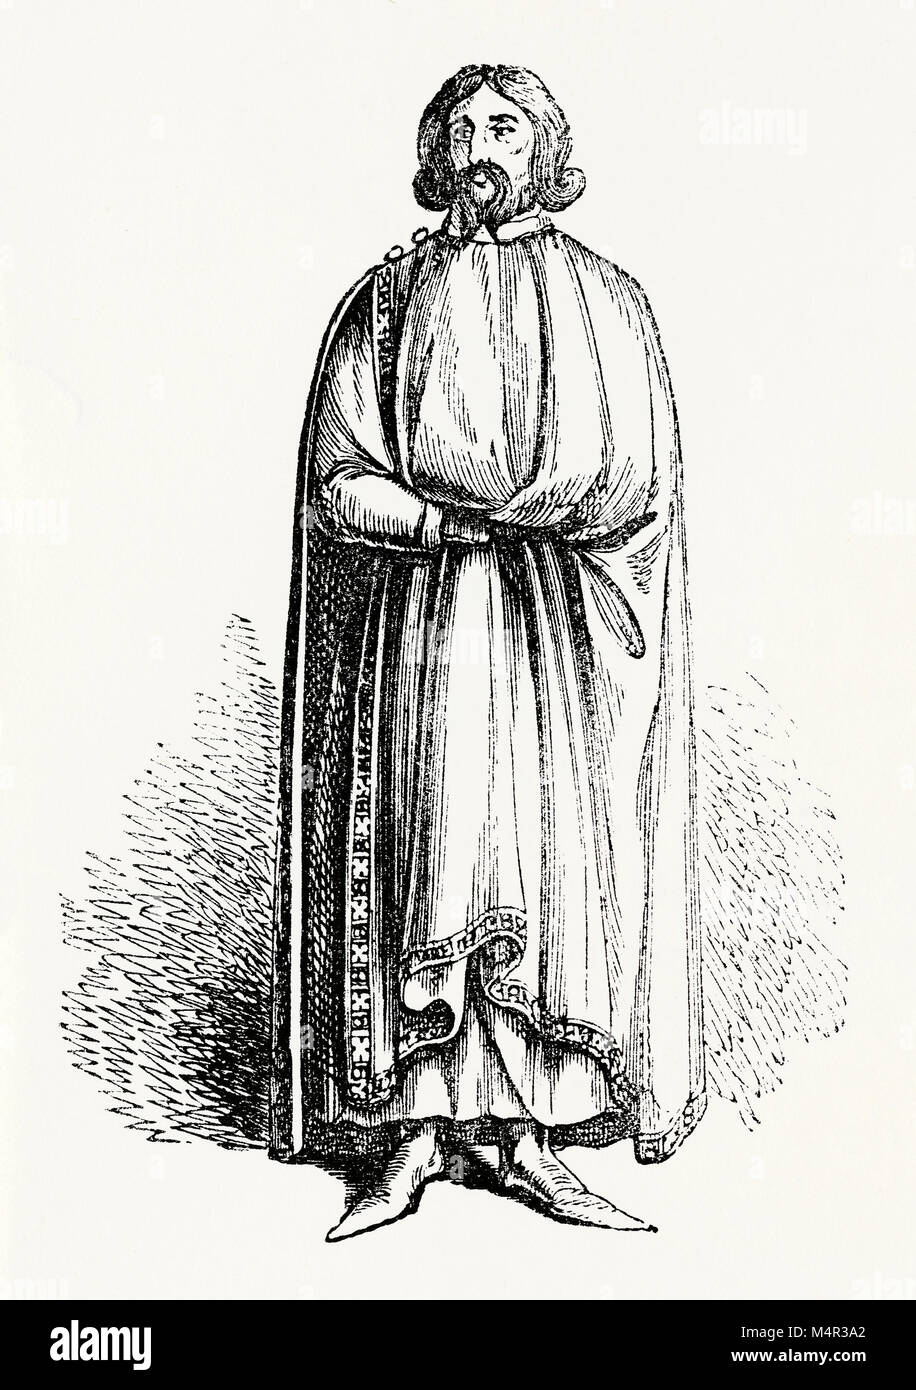 Edmund of Langley, first Duke of York (1341–1402) was the fourth surviving son of King Edward III of England and Philippa of Hainault. Like many medieval English princes, Edmund gained his nickname from his birthplace: Kings Langley Palace in Hertfordshire. He was the founder of the House of York Stock Photo